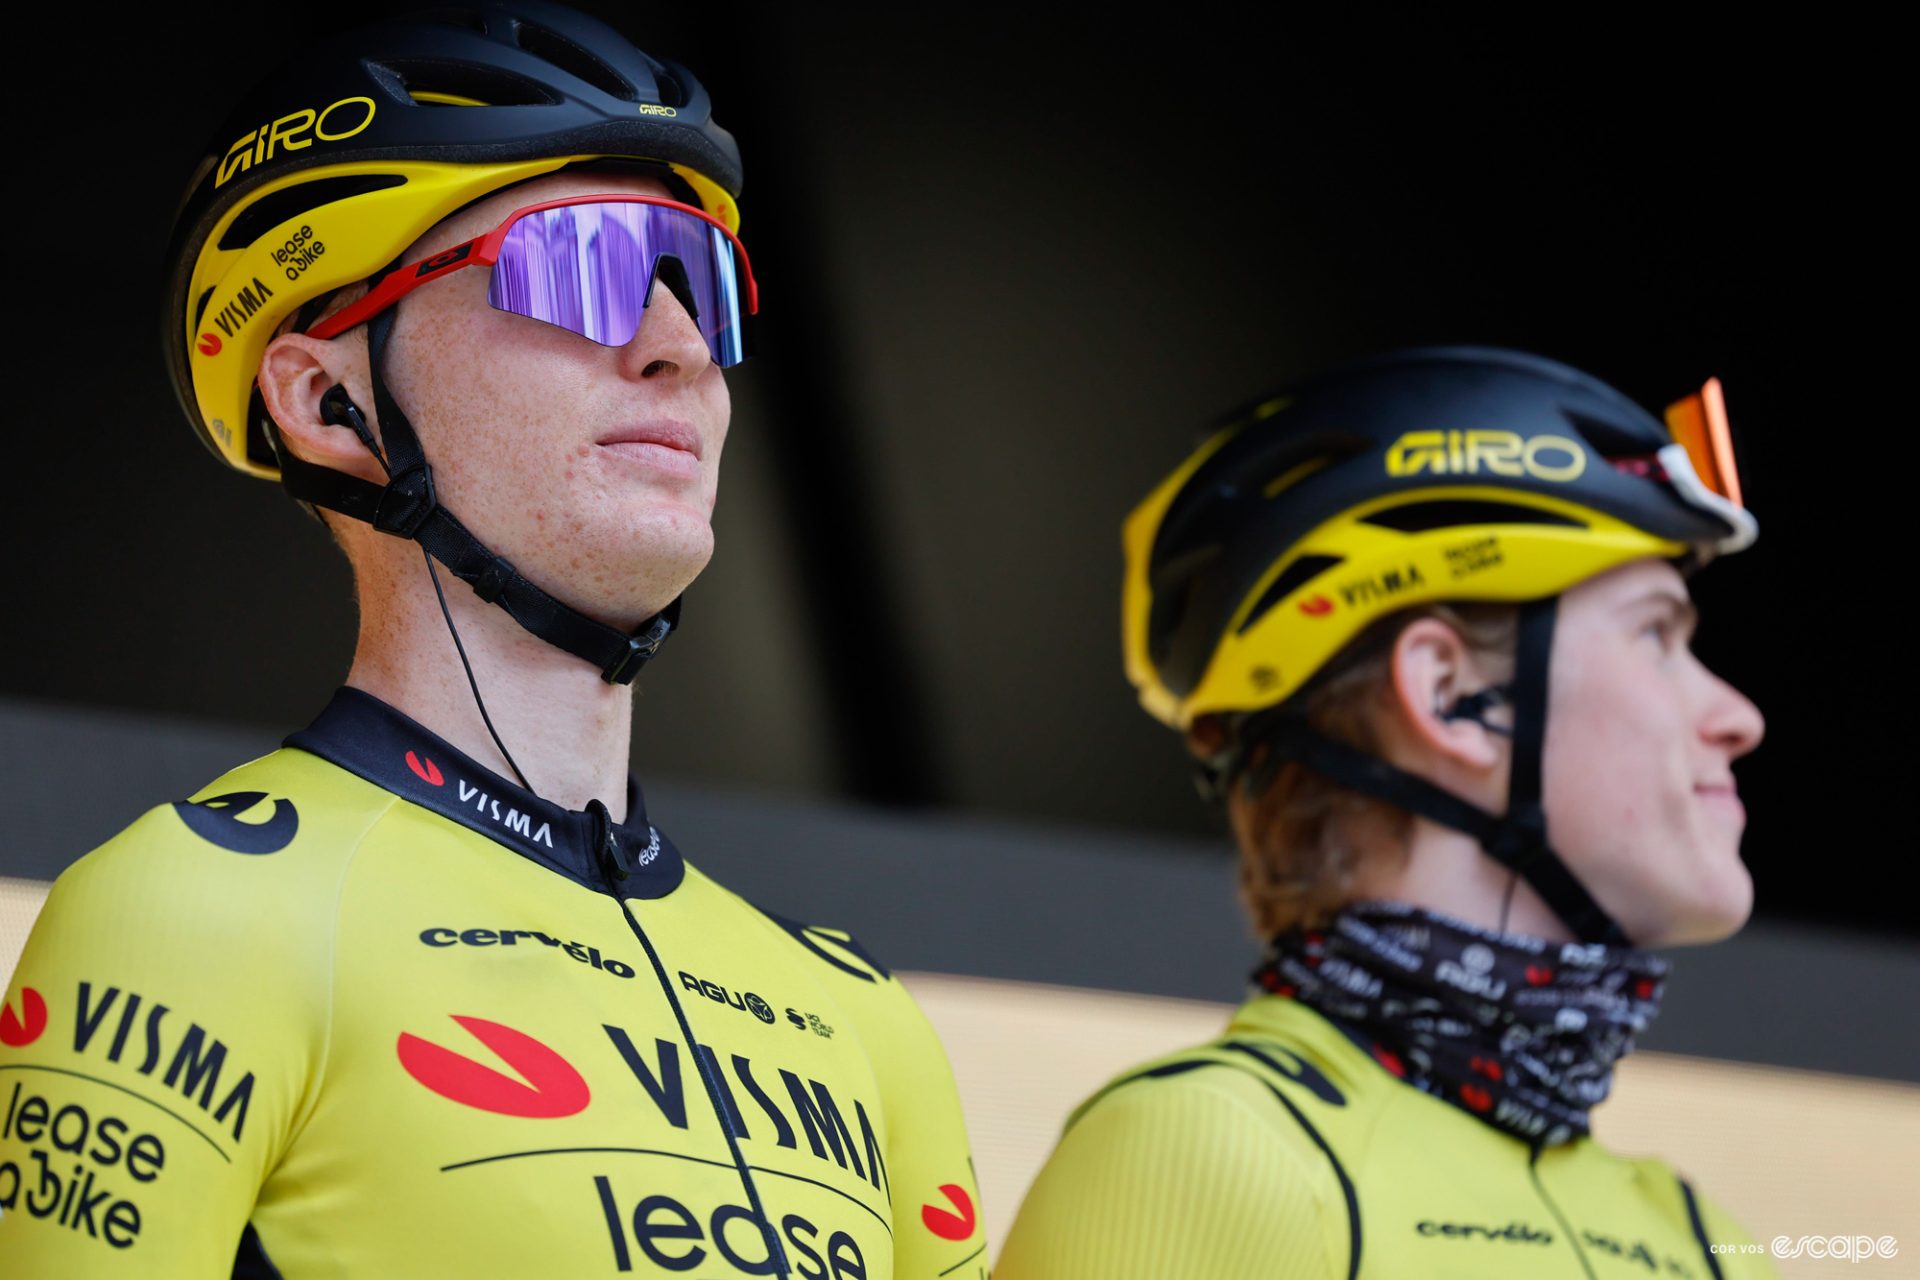 Matteo Jorgenson attends sign in at the 2024 Kuurne-Brussel-Kuurne race. He's in the distinctive yellow jersey of Visma-Lease a Bike and has an impassive expression behind sunglasses.